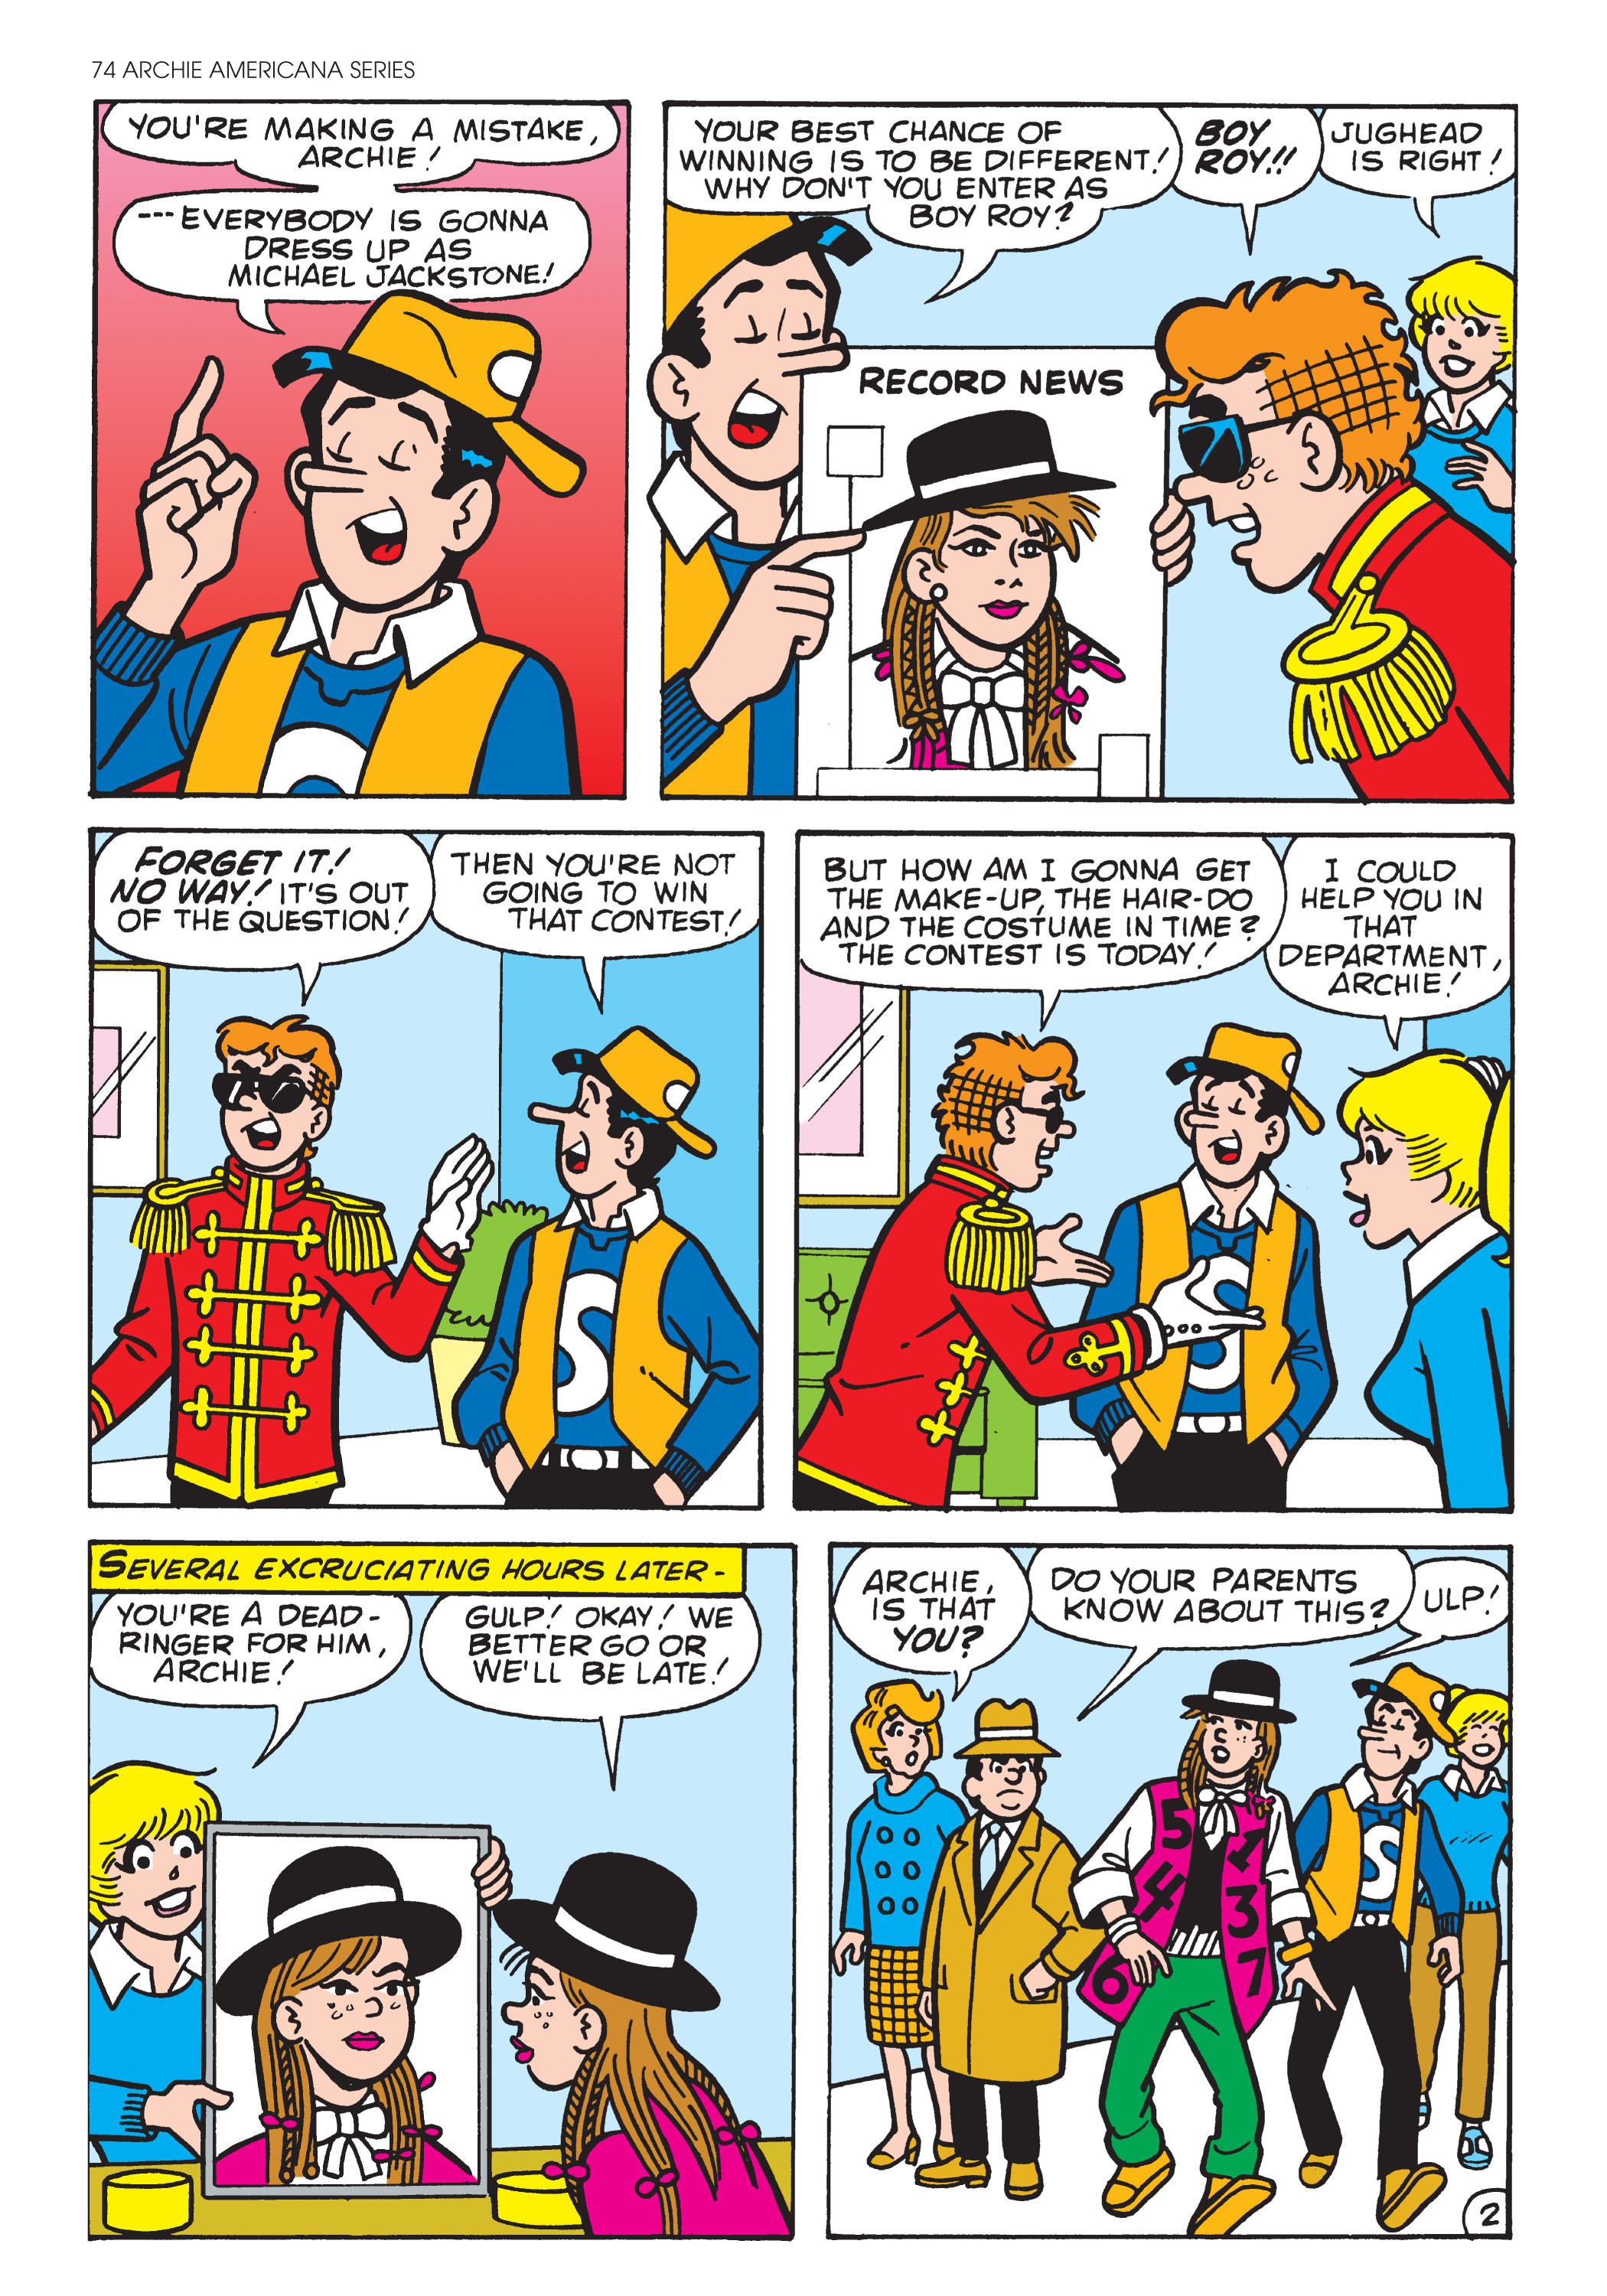 Read online Archie Americana Series comic -  Issue # TPB 5 - 76